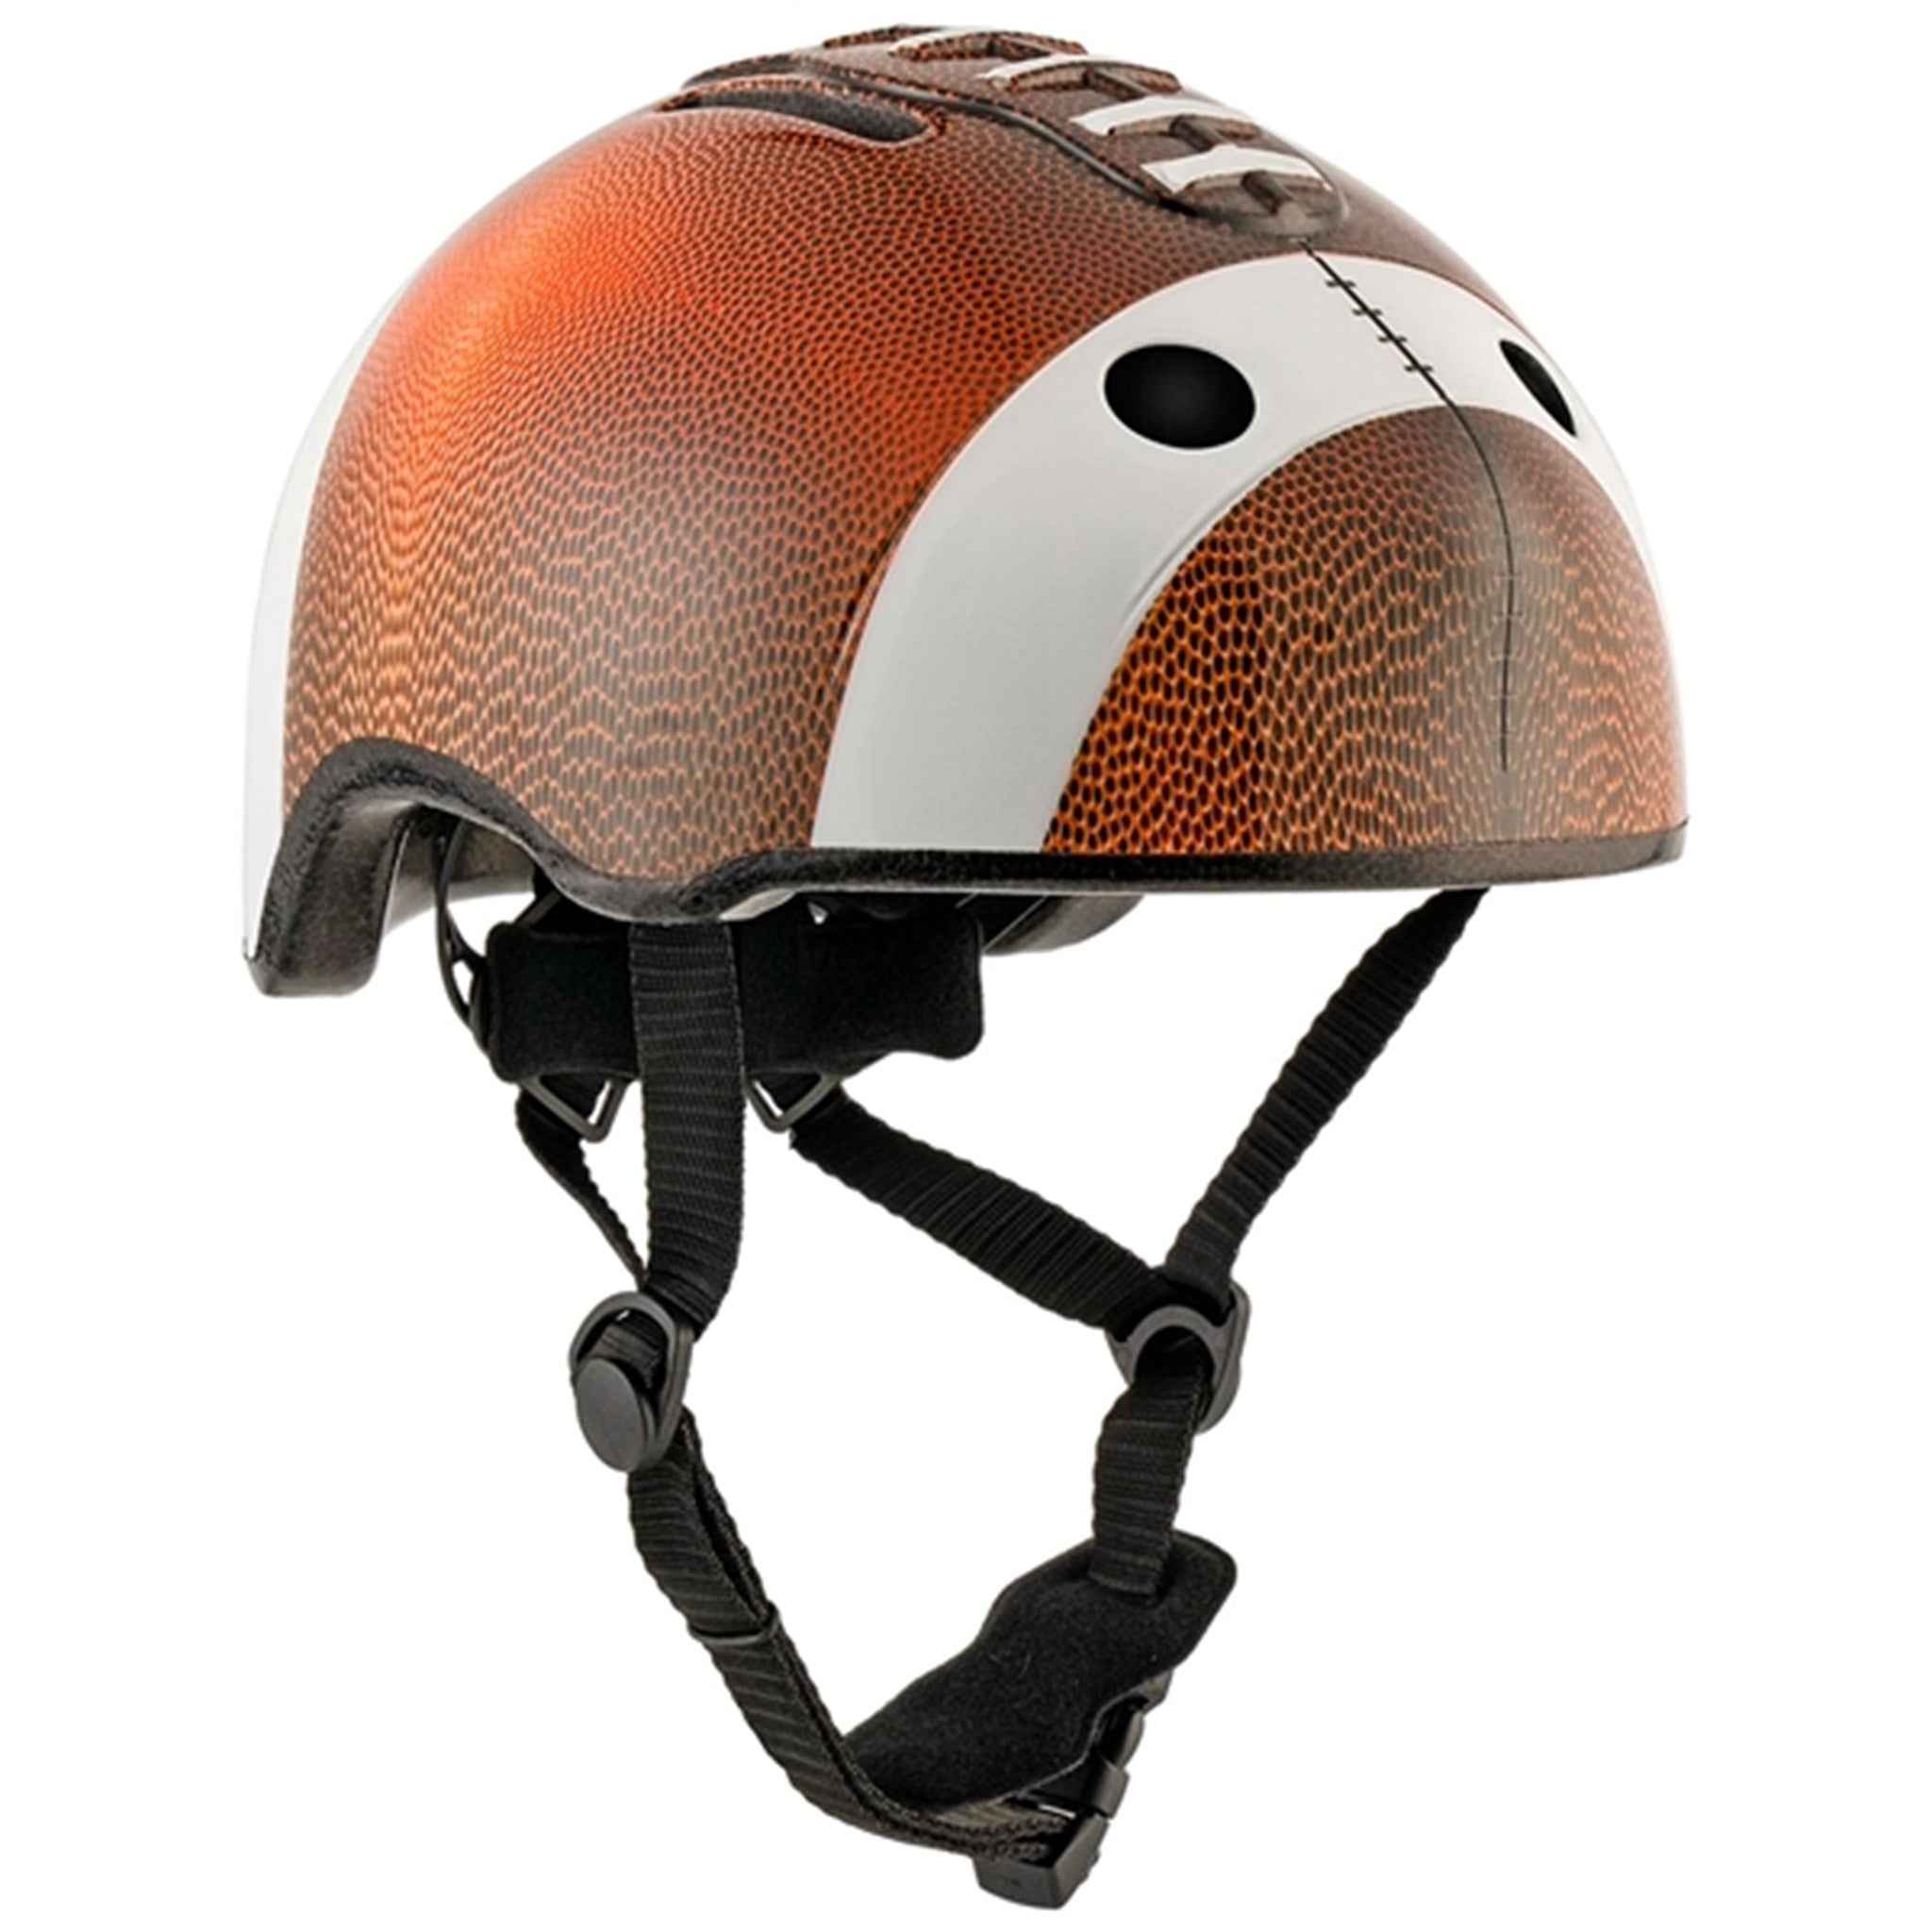 Crazy Safety Football Bicycle Helmet Brown